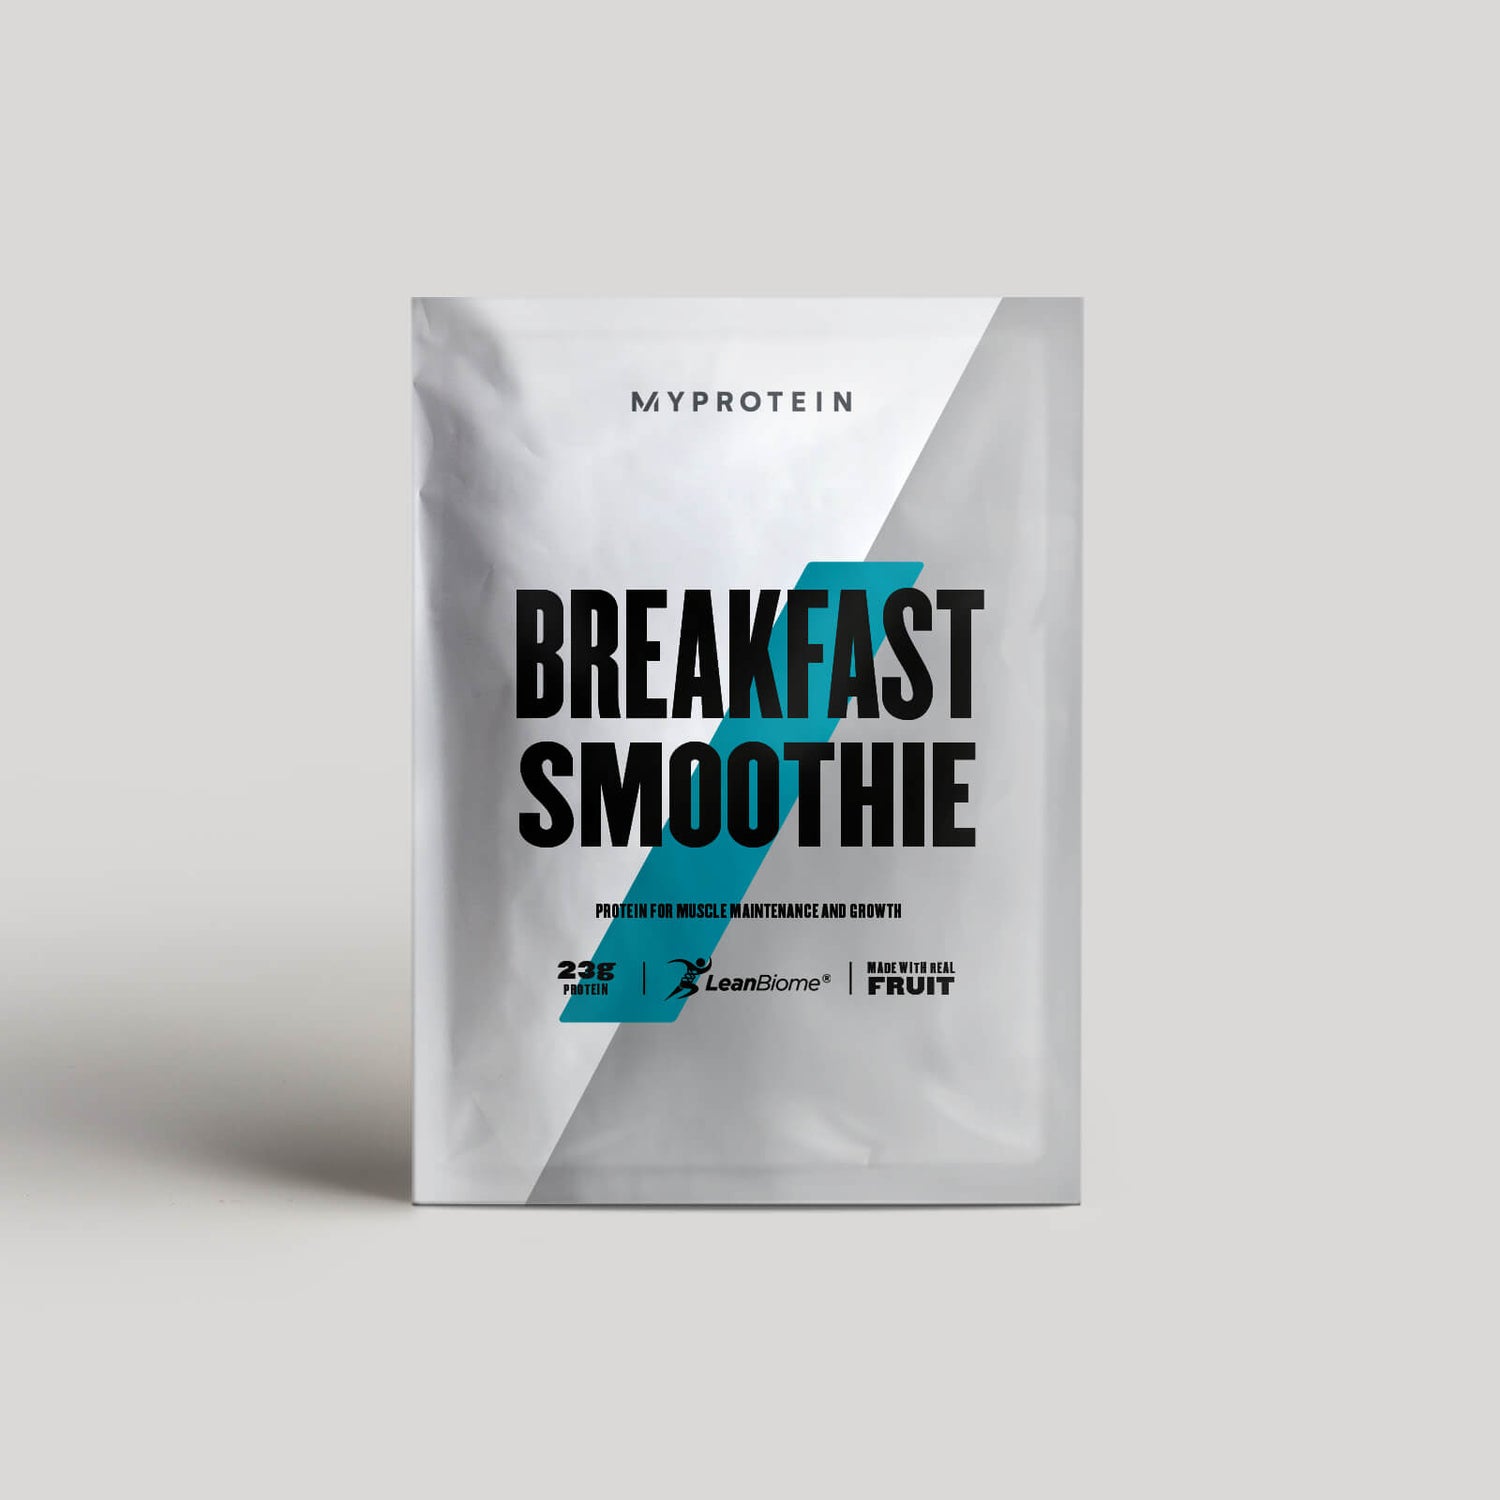 Breakfest Smoothie - 40g - Blueberry and Apple